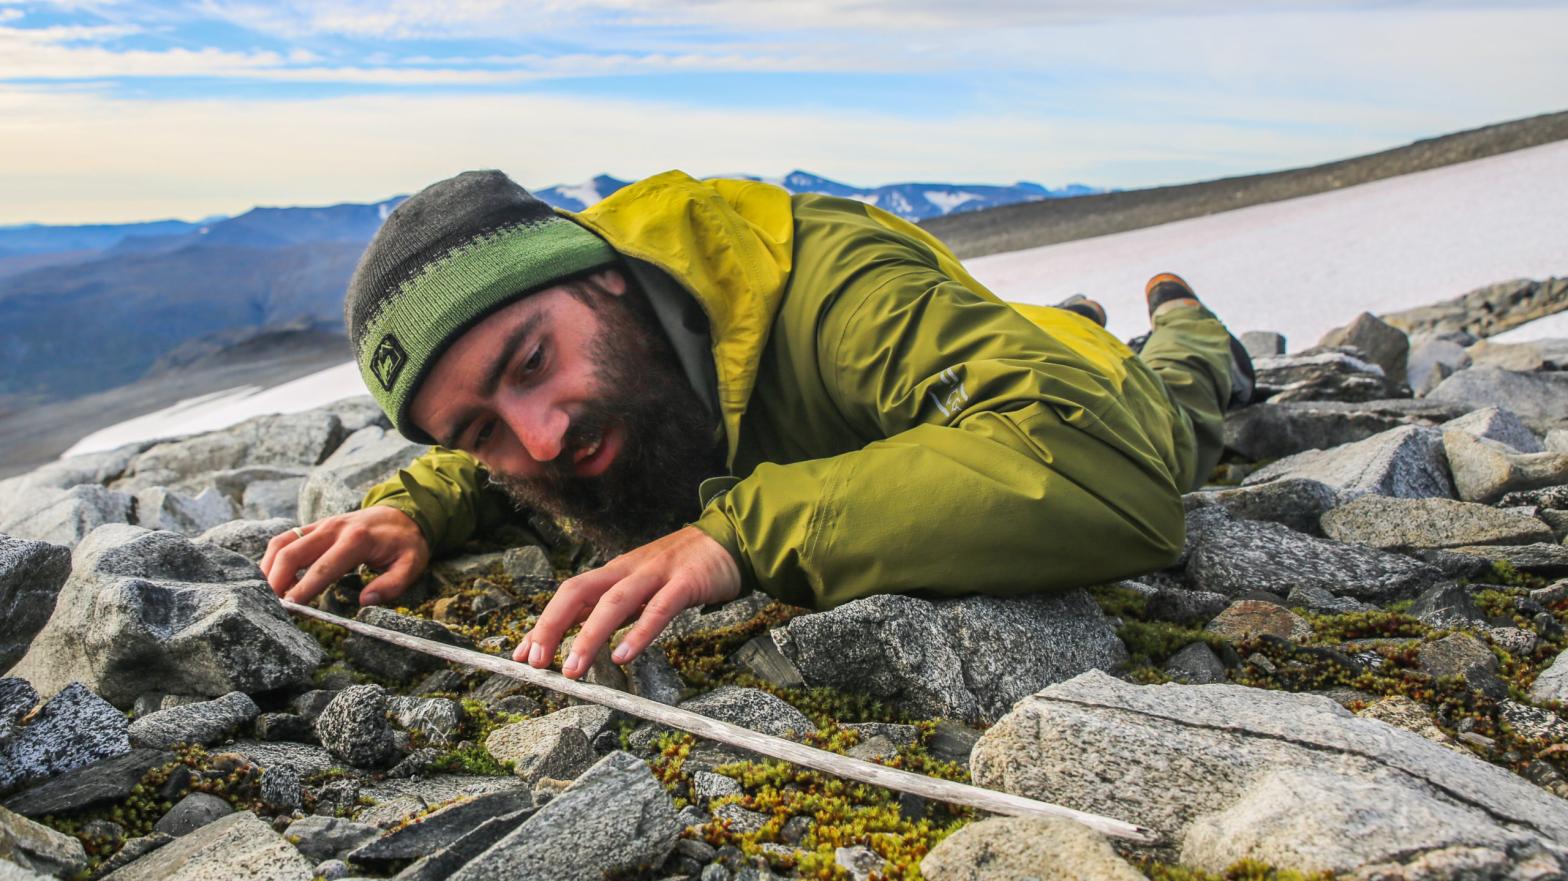 A researcher looks at an artefact found melted out of a Norwegian ice patch. Finds like these are becoming more common as the planet heats up. (Photo: Courtesy Lars Holger Pilø)